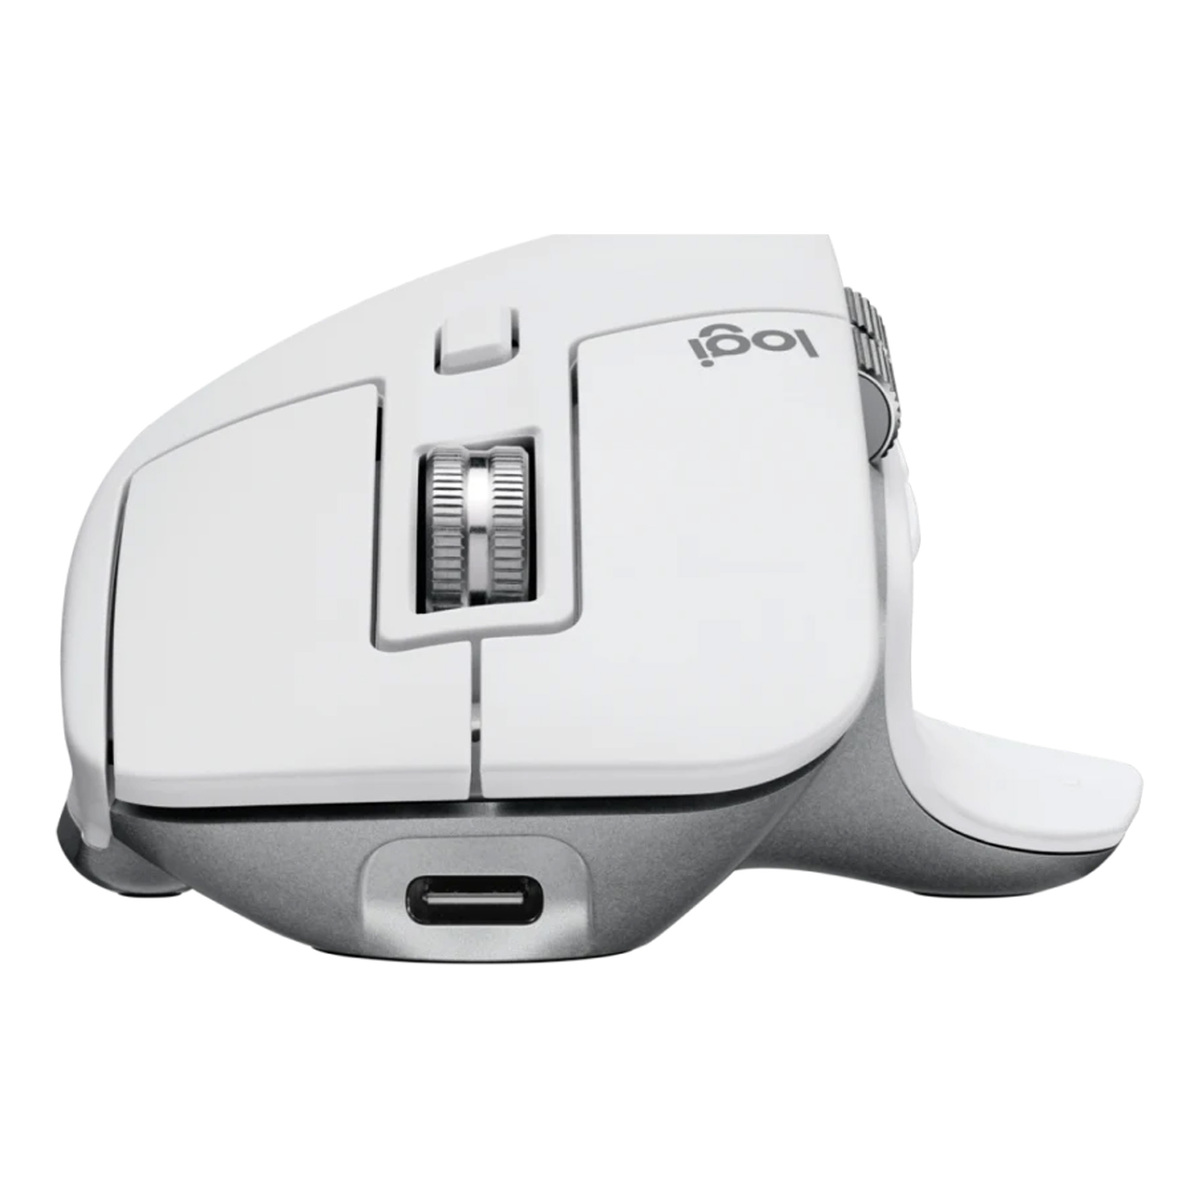 MX Master 3S Wireless Mouse